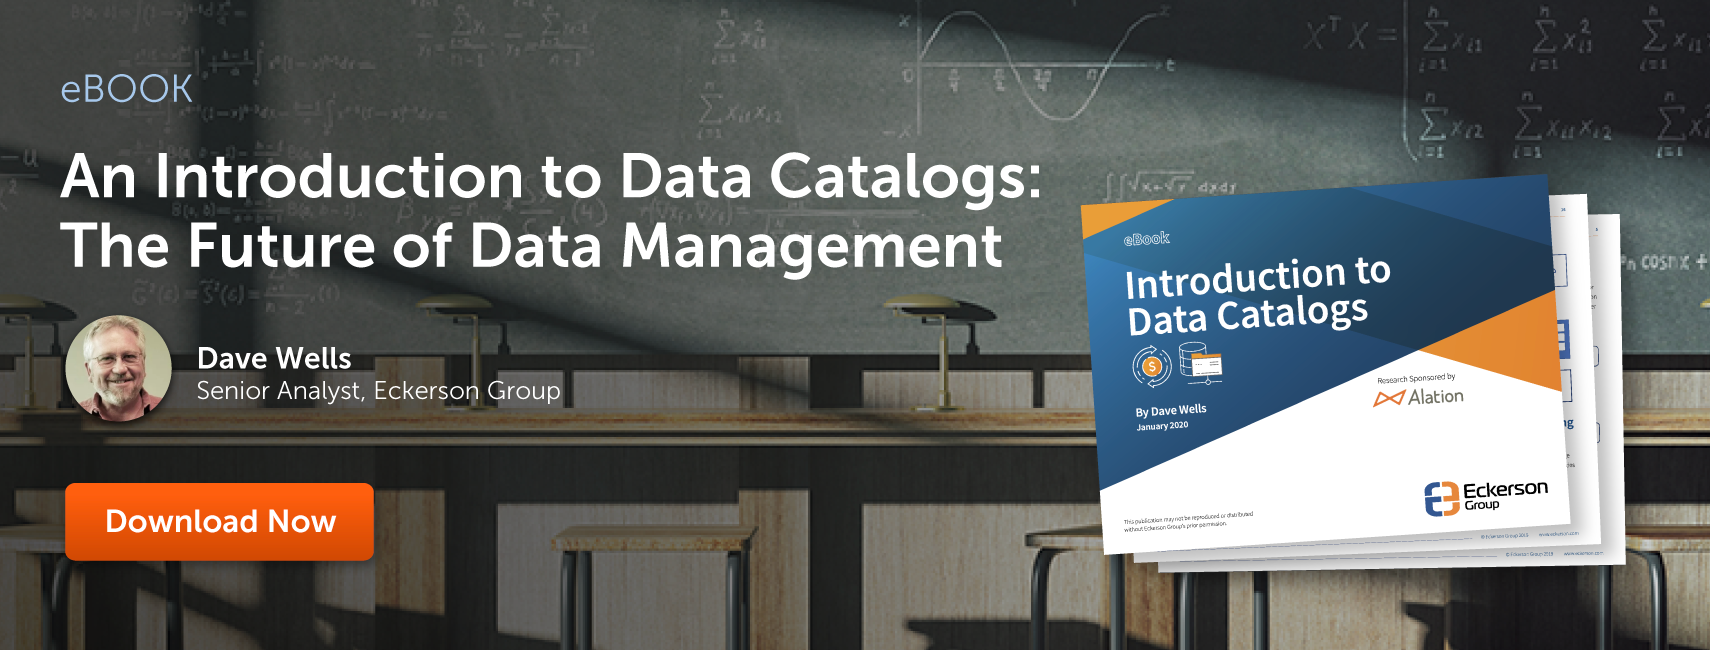 An Introduction to Data Catalogs: The Future of Data Management